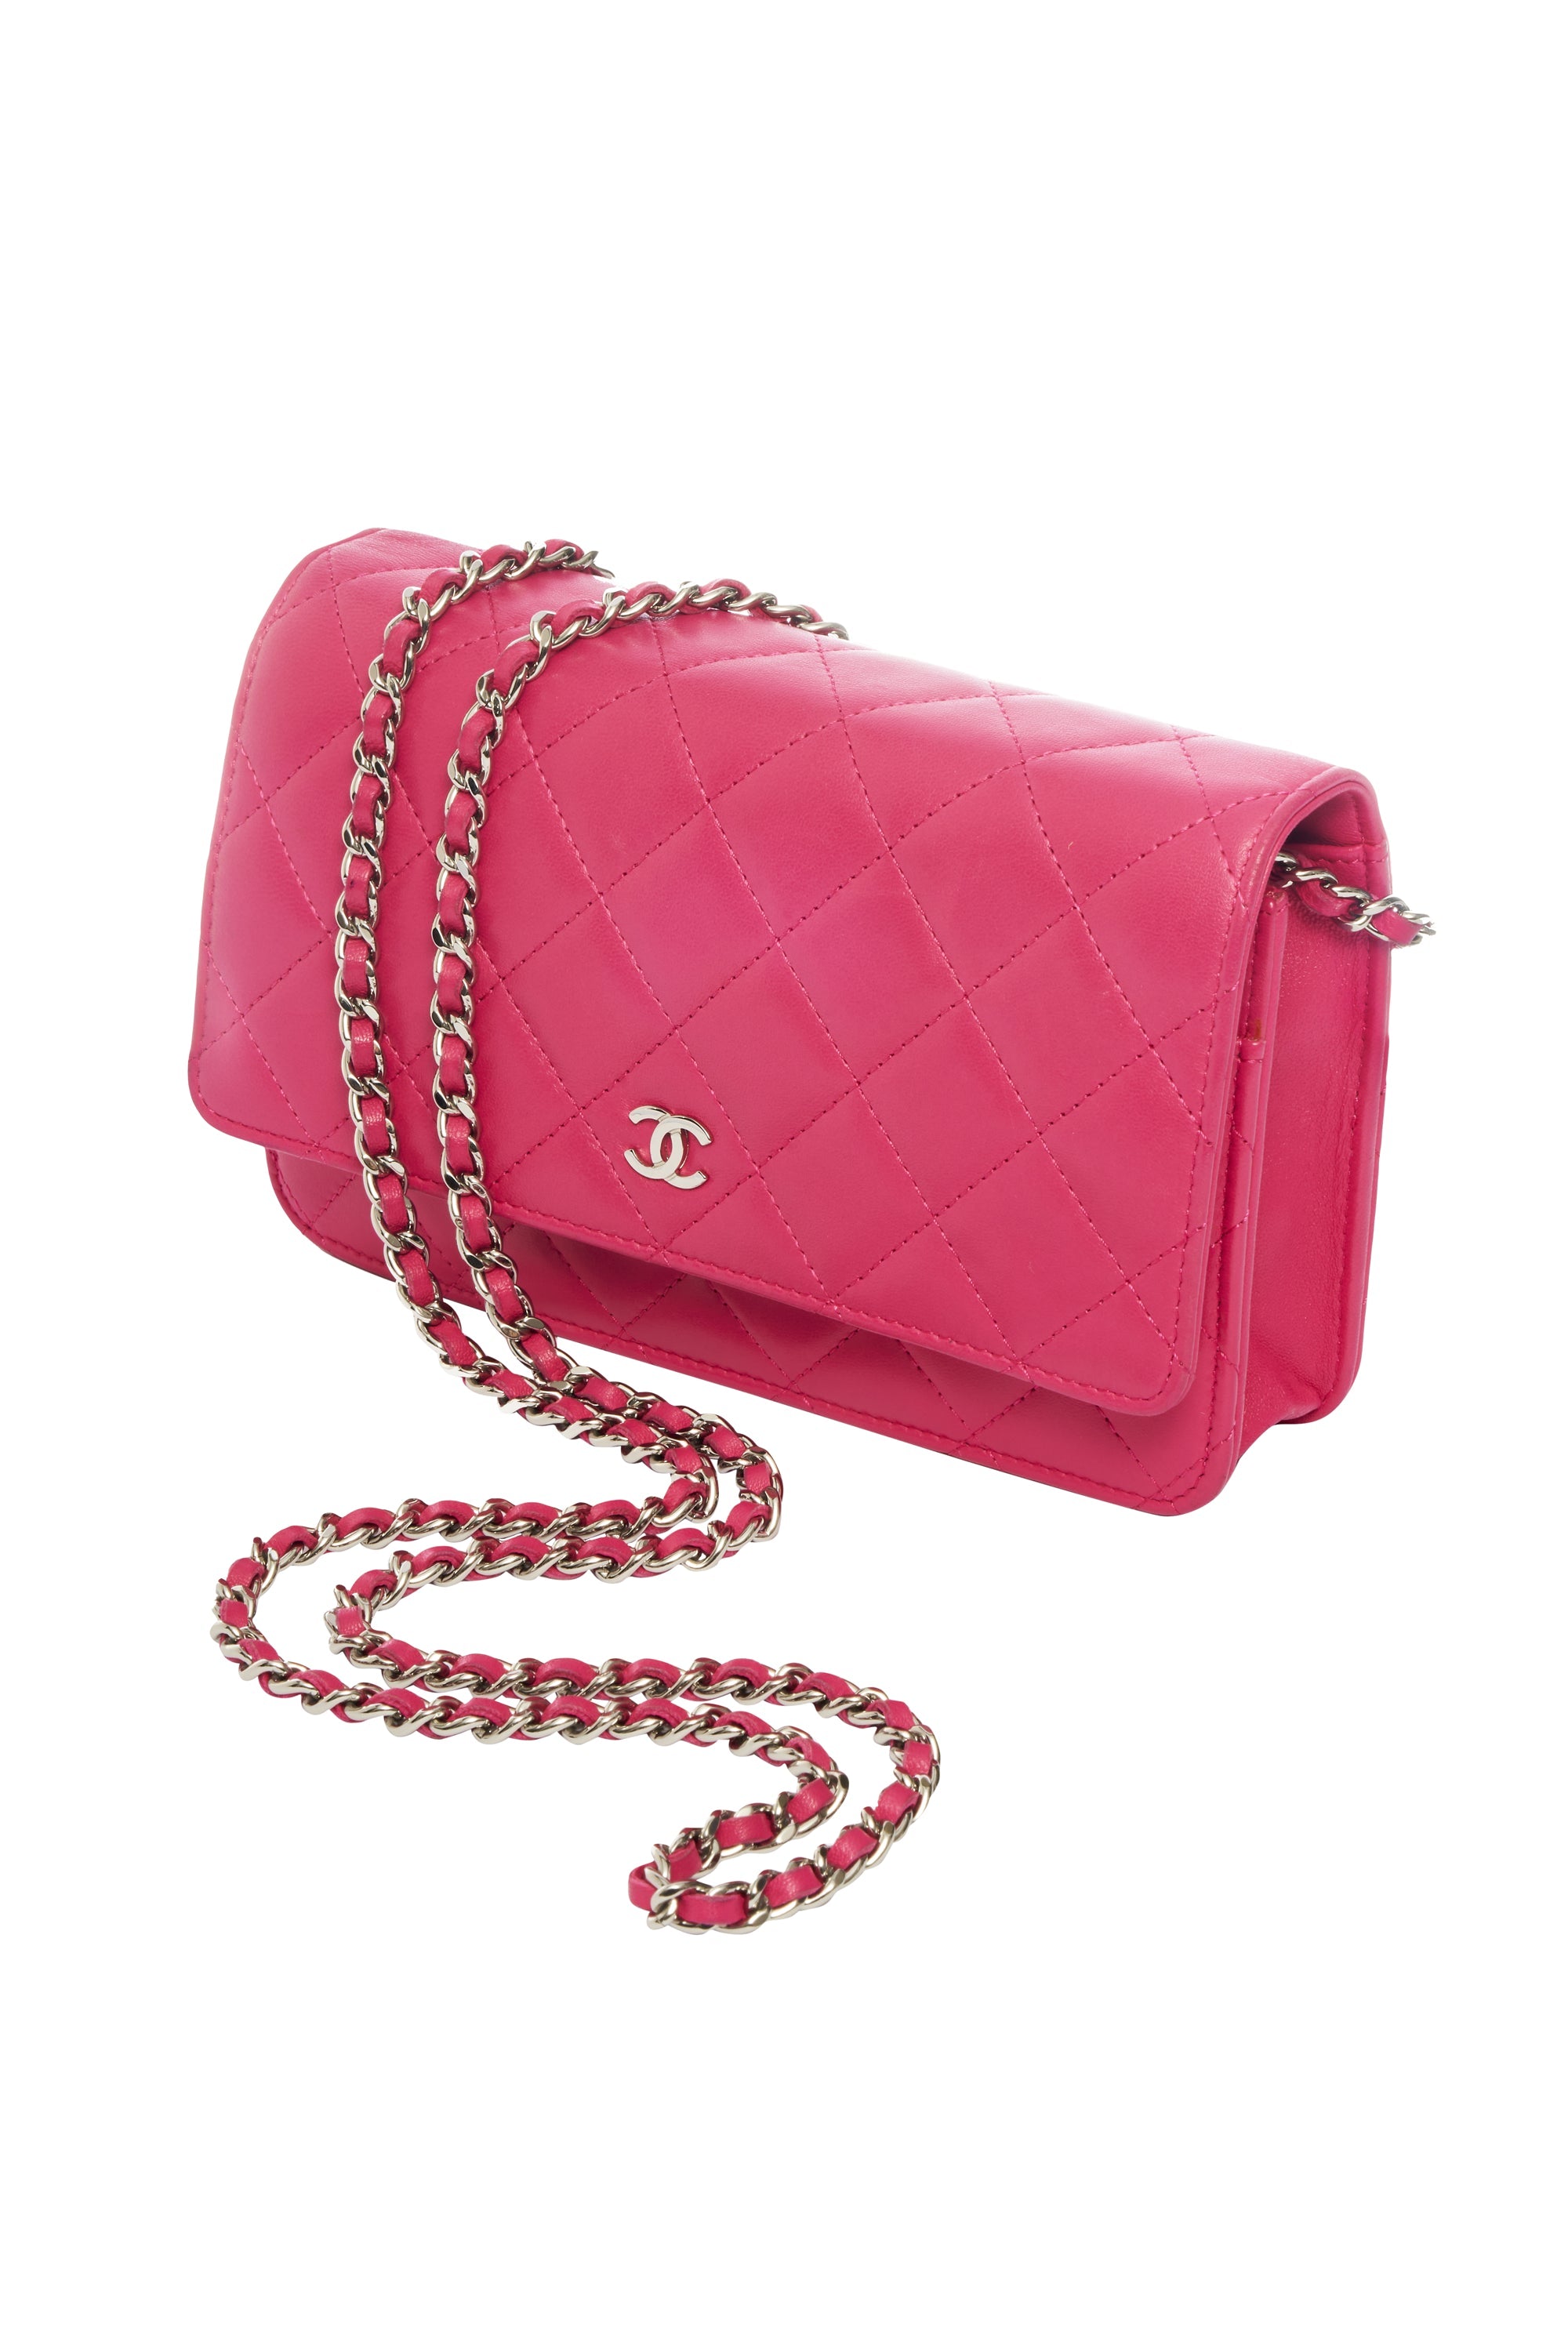 Chanel Pink Quilted Wallet on a Chain 2014